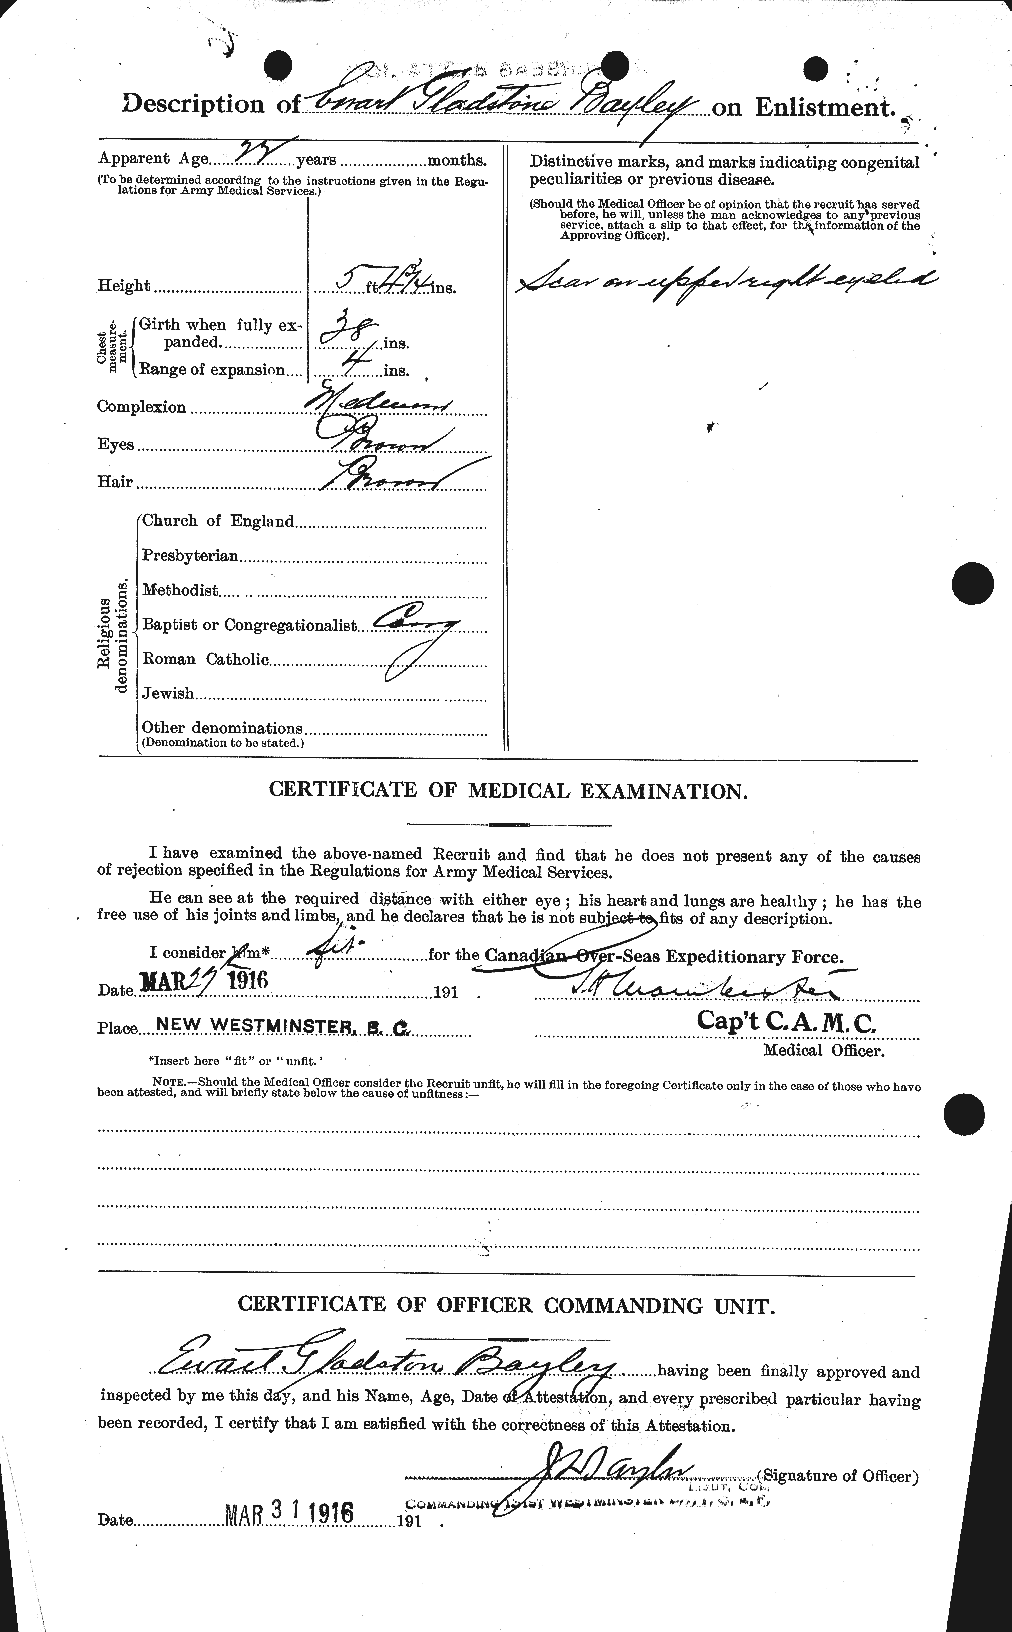 Personnel Records of the First World War - CEF 229621b